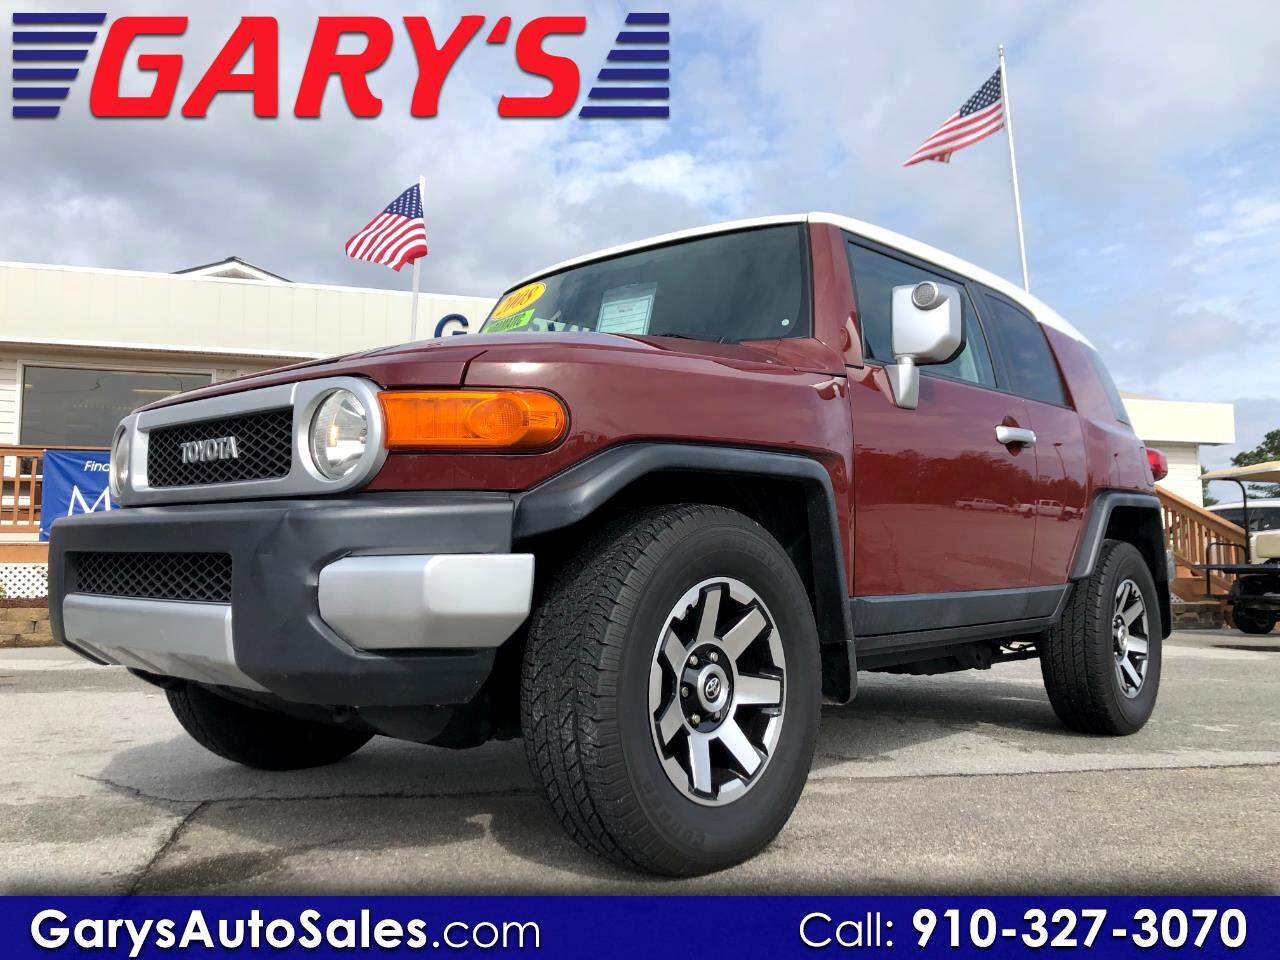 Used 2008 Toyota Fj Cruiser 2wd For Sale In Sneads Ferry Nc 28460